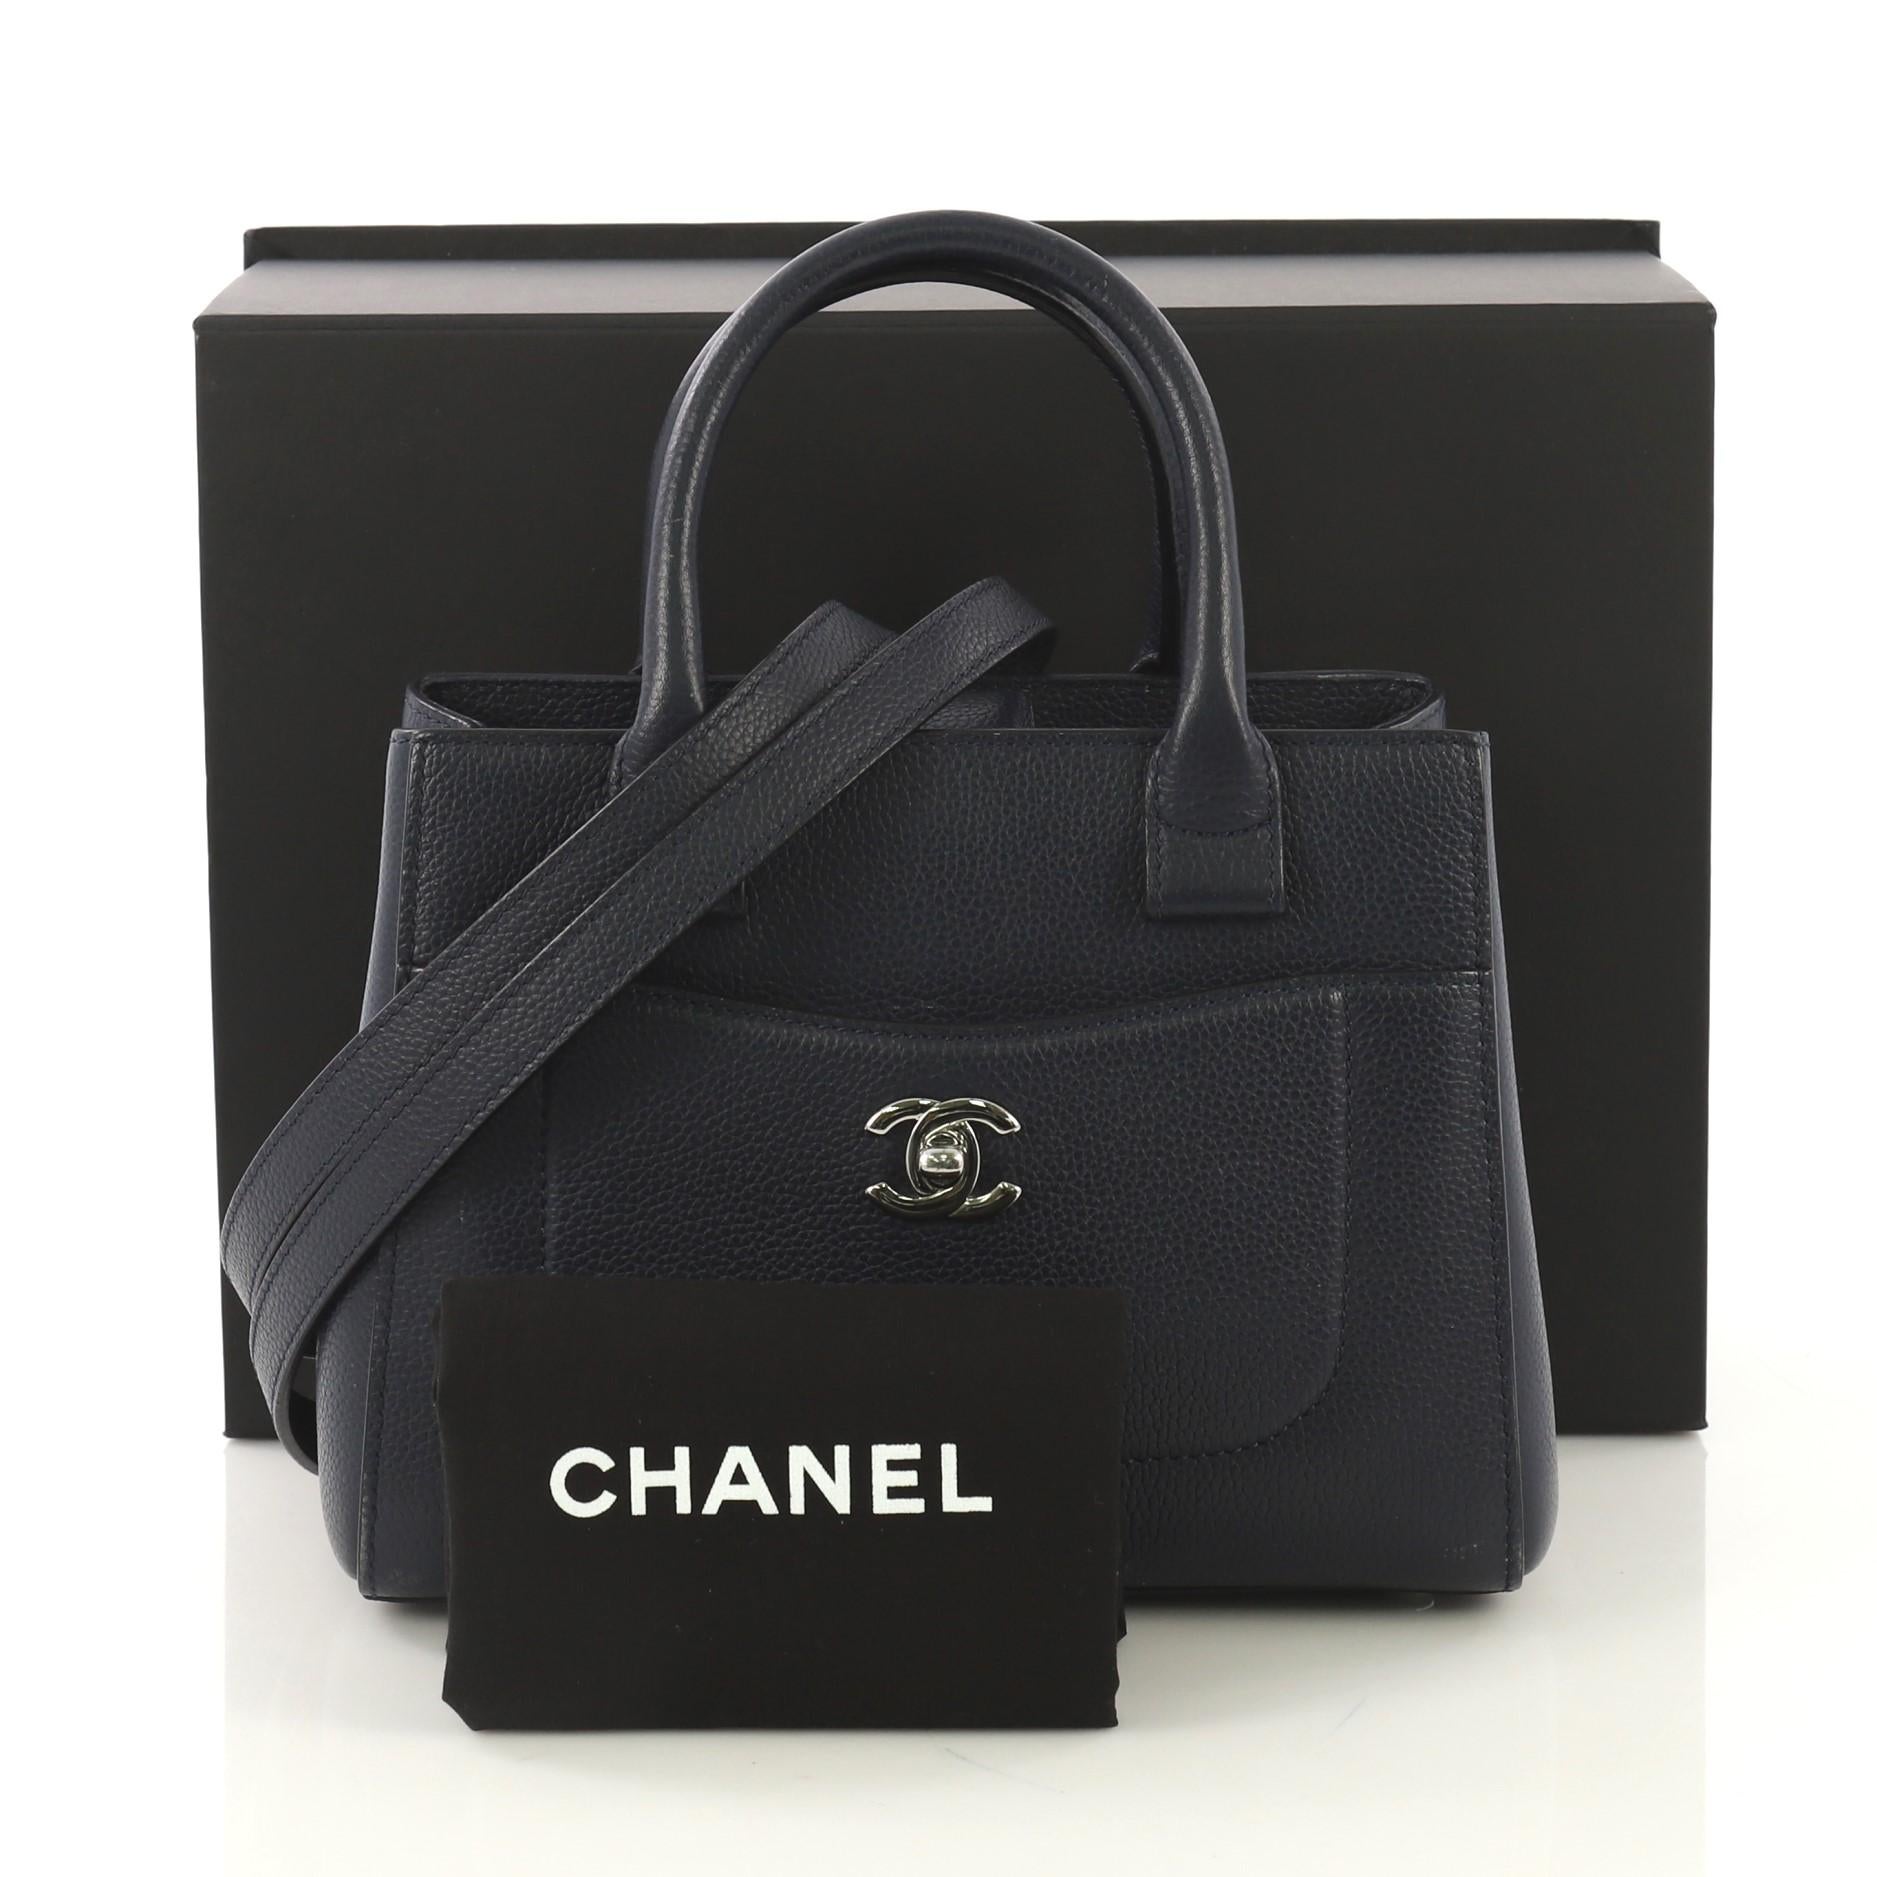 This Chanel Neo Executive Tote Grained Calfskin Mini, crafted from blue grained calfskin leather, features dual rolled leather handles, front pocket with CC turn-lock closure, and silver-tone hardware. Its magnetic snap closure opens to a blue